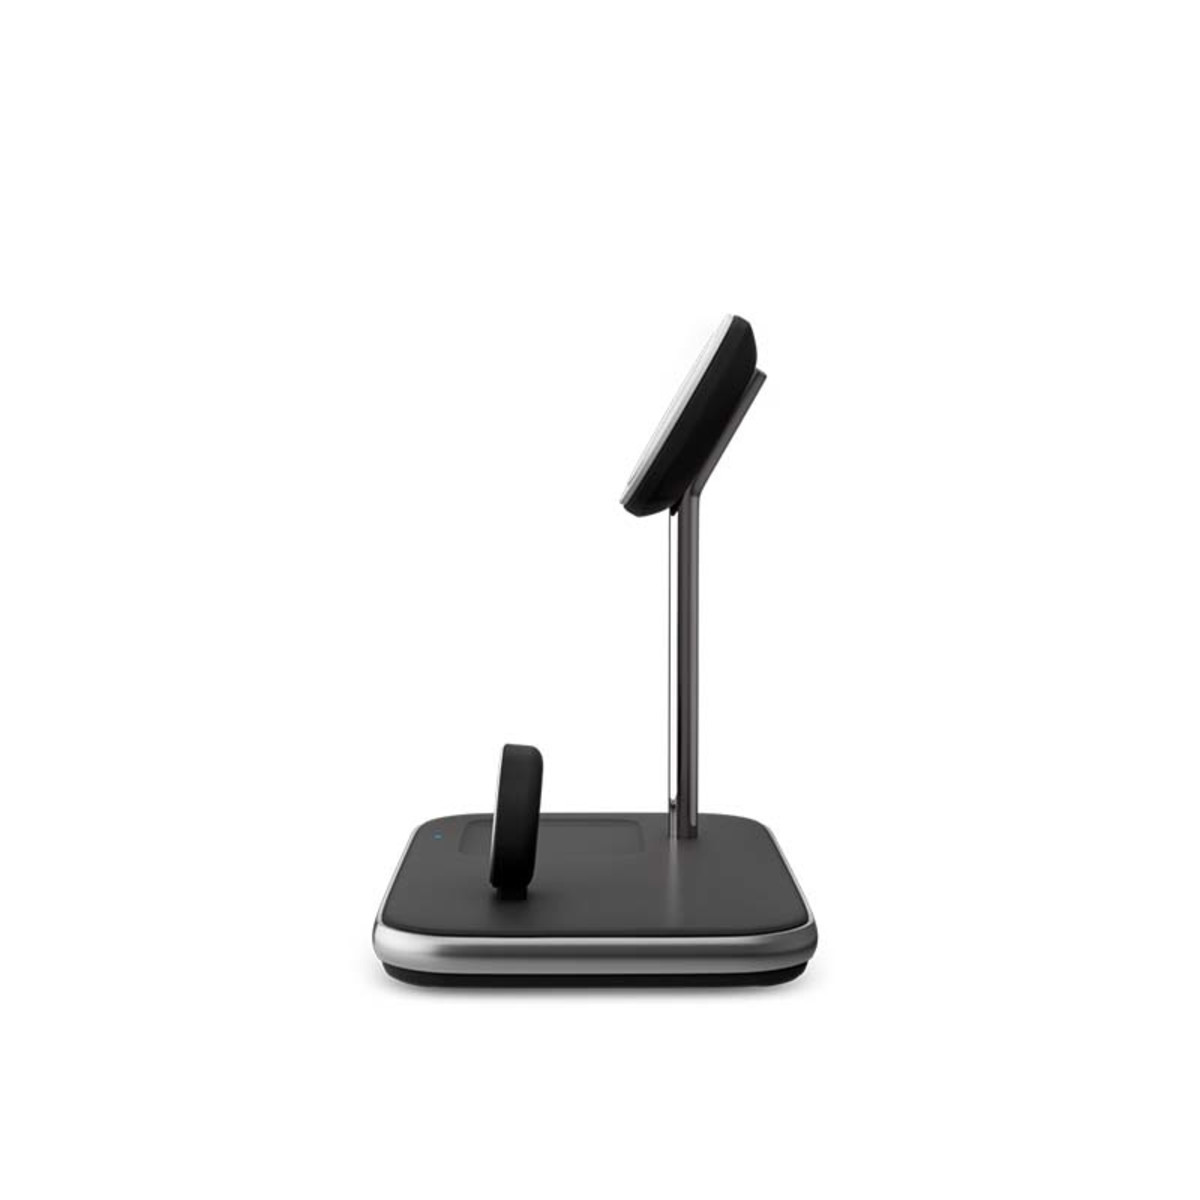 3in1 MagSafe Wireless Charger - Black